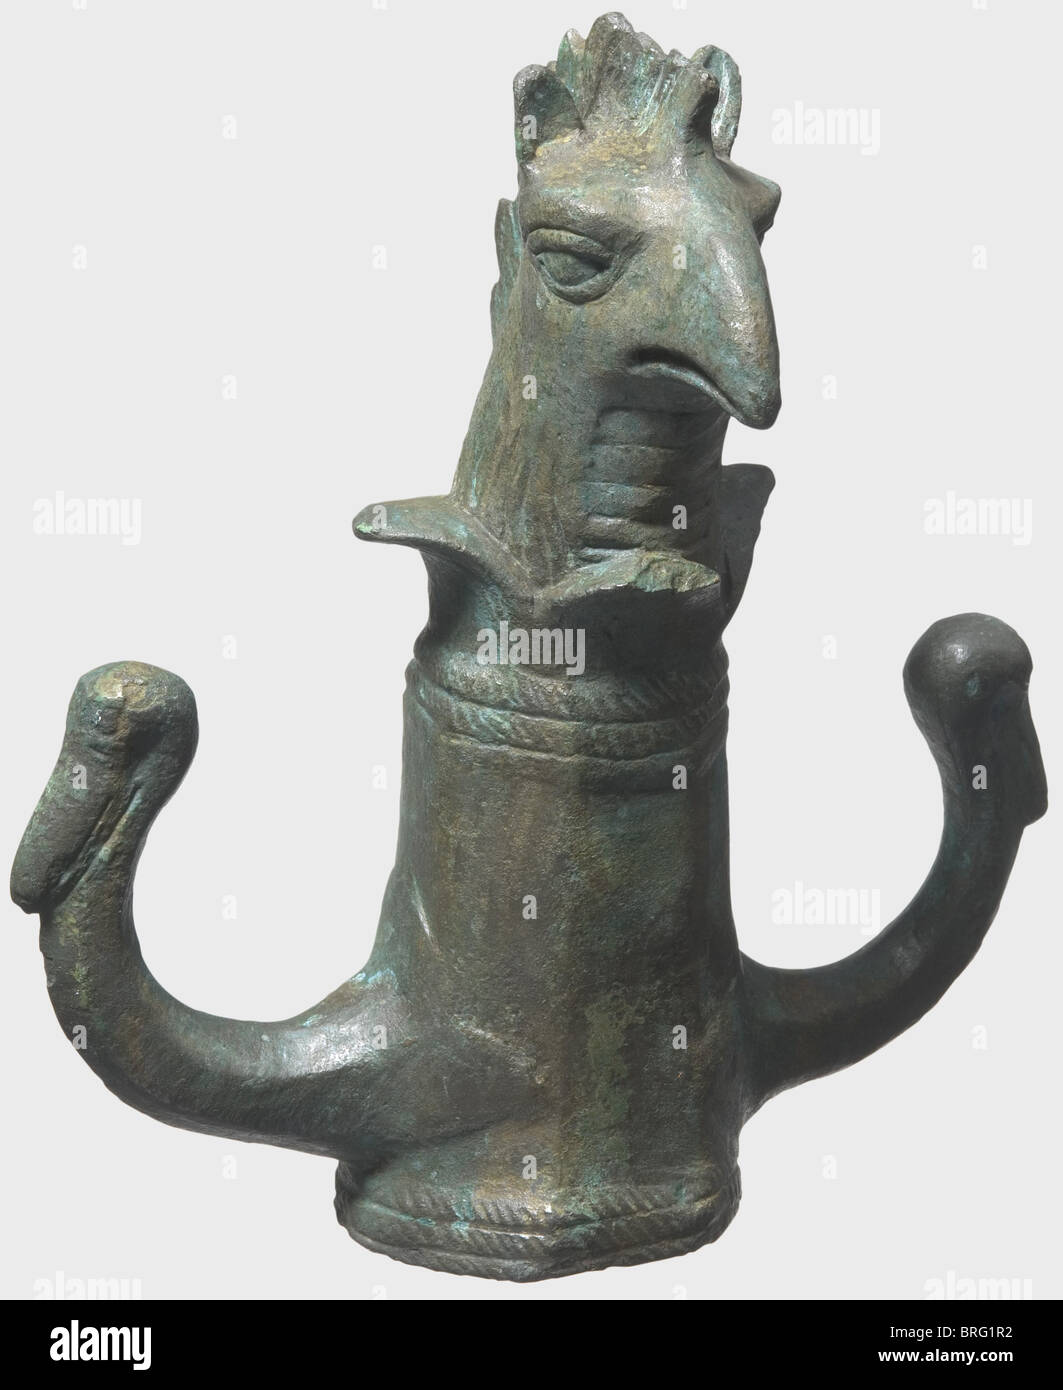 A Roman wagon fitting with rein holders, 1st/2nd centuries A.D. Bronze with a heavy greenish patina. Heavy, octagonal socket with a finely corded bottom edge. Knob in the shape of a full-relief griffon head with engraved and chiselled details. Two hook-shaped rein holders on the sides in the shape of swan's heads. Cleaned excavation discovery. Height 17 cm. historic, historical, ancient world, Roman Empire, ancient world, ancient times, object, objects, stills, clipping, clippings, cut out, cut-out, cut-outs, Additional-Rights-Clearences-Not Available Stock Photo